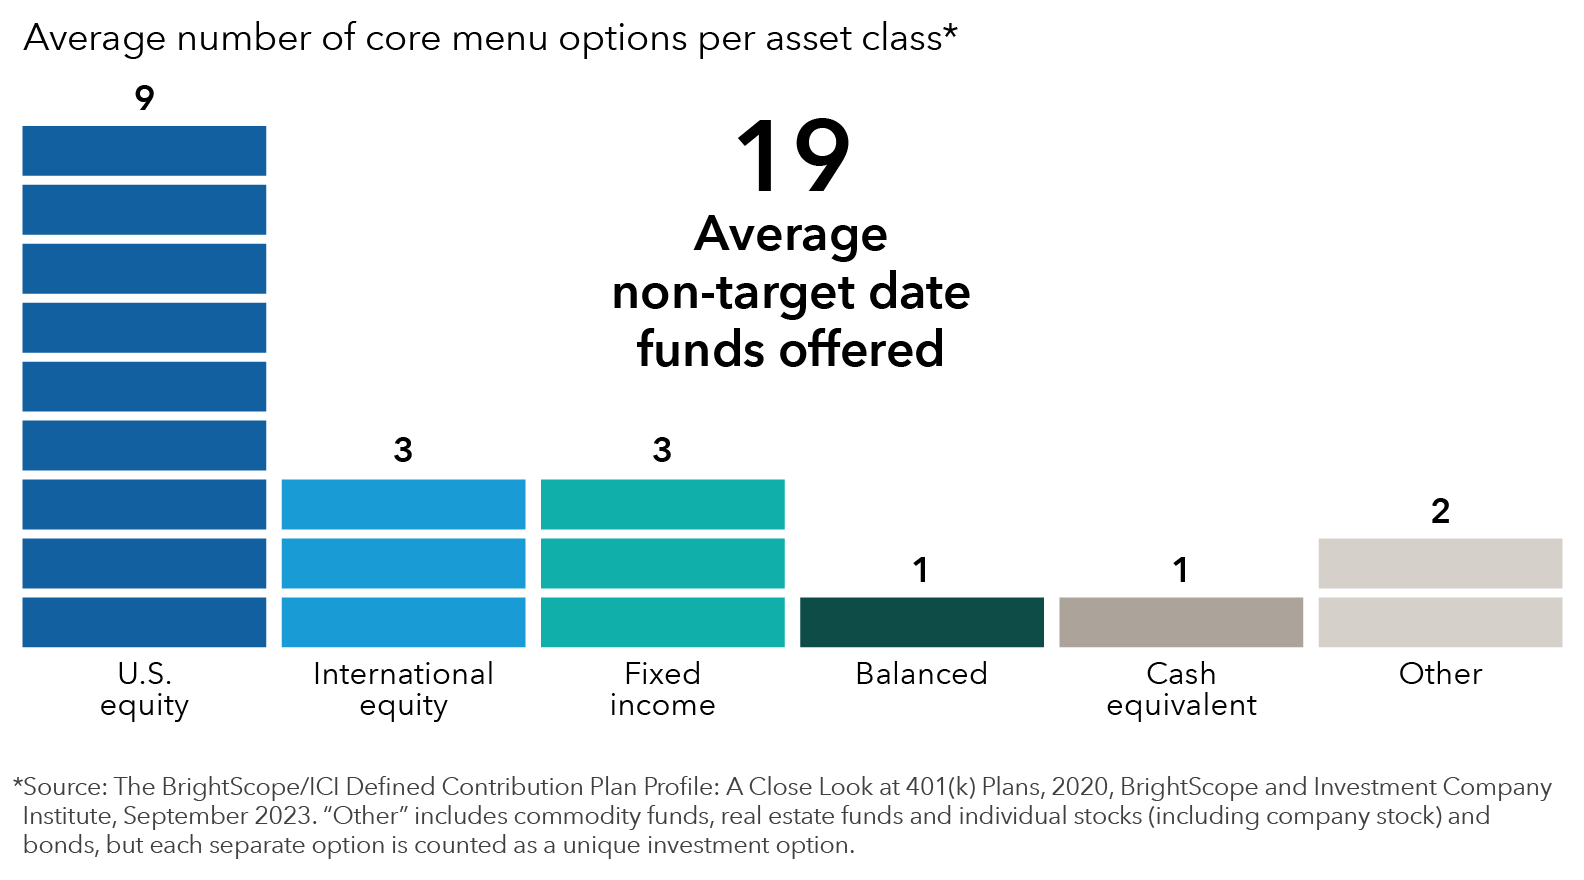 This bar chart shows the average number of non-target-date investment options in a defined contribution plan. On average, there are 19 non-target date options. The multi-colored chart has six bars showing the average number of funds by fund type in a plan: nine U.S. equity funds, three international equity funds, three fixed income funds, one balanced fund, one cash equivalent fund and two categorized as “other.” “Other” includes commodity funds, real estate funds and individual stocks (including company stock) and bonds, but each separate option is counted as a unique investment option. The source for this bar chart is The BrightScope/ICI Defined Contribution Plan Profile: A Close Look at 401(k) Plans, 2020, BrightScope and Investment Company Institute, September 2023.